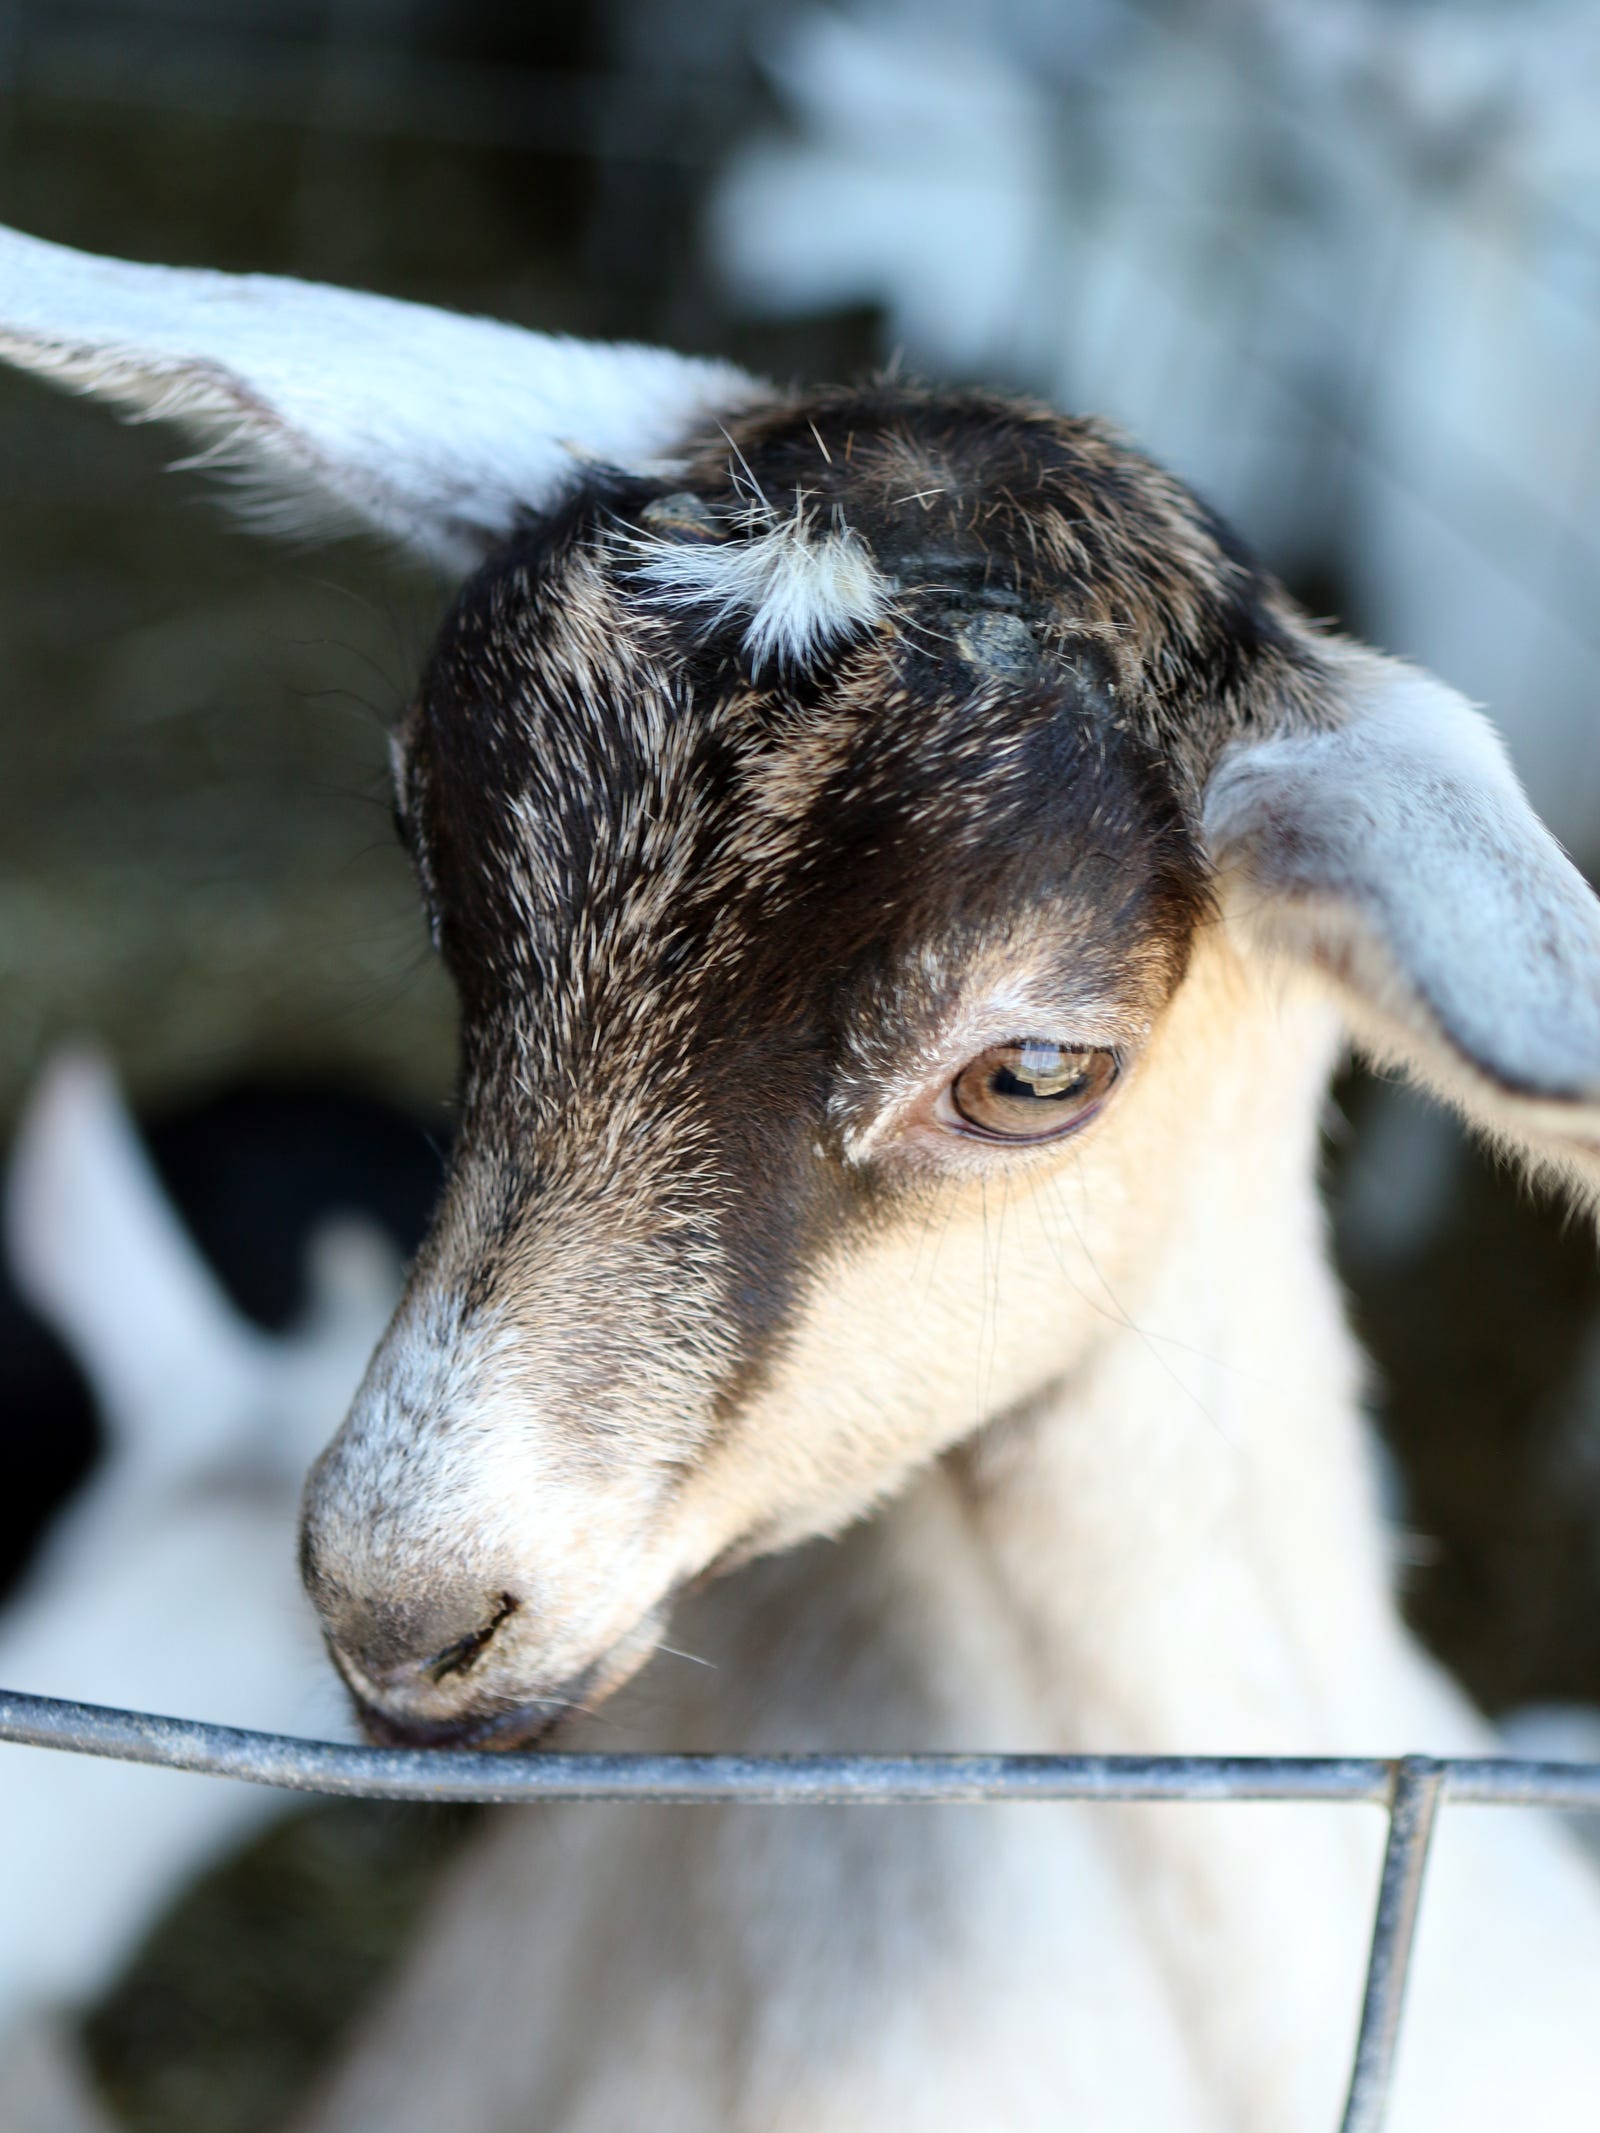 Goats can be weaned or on milk substitute when they reach 30 pounds and are eating at least a quarter pound of solids per day along with forage of their choice.